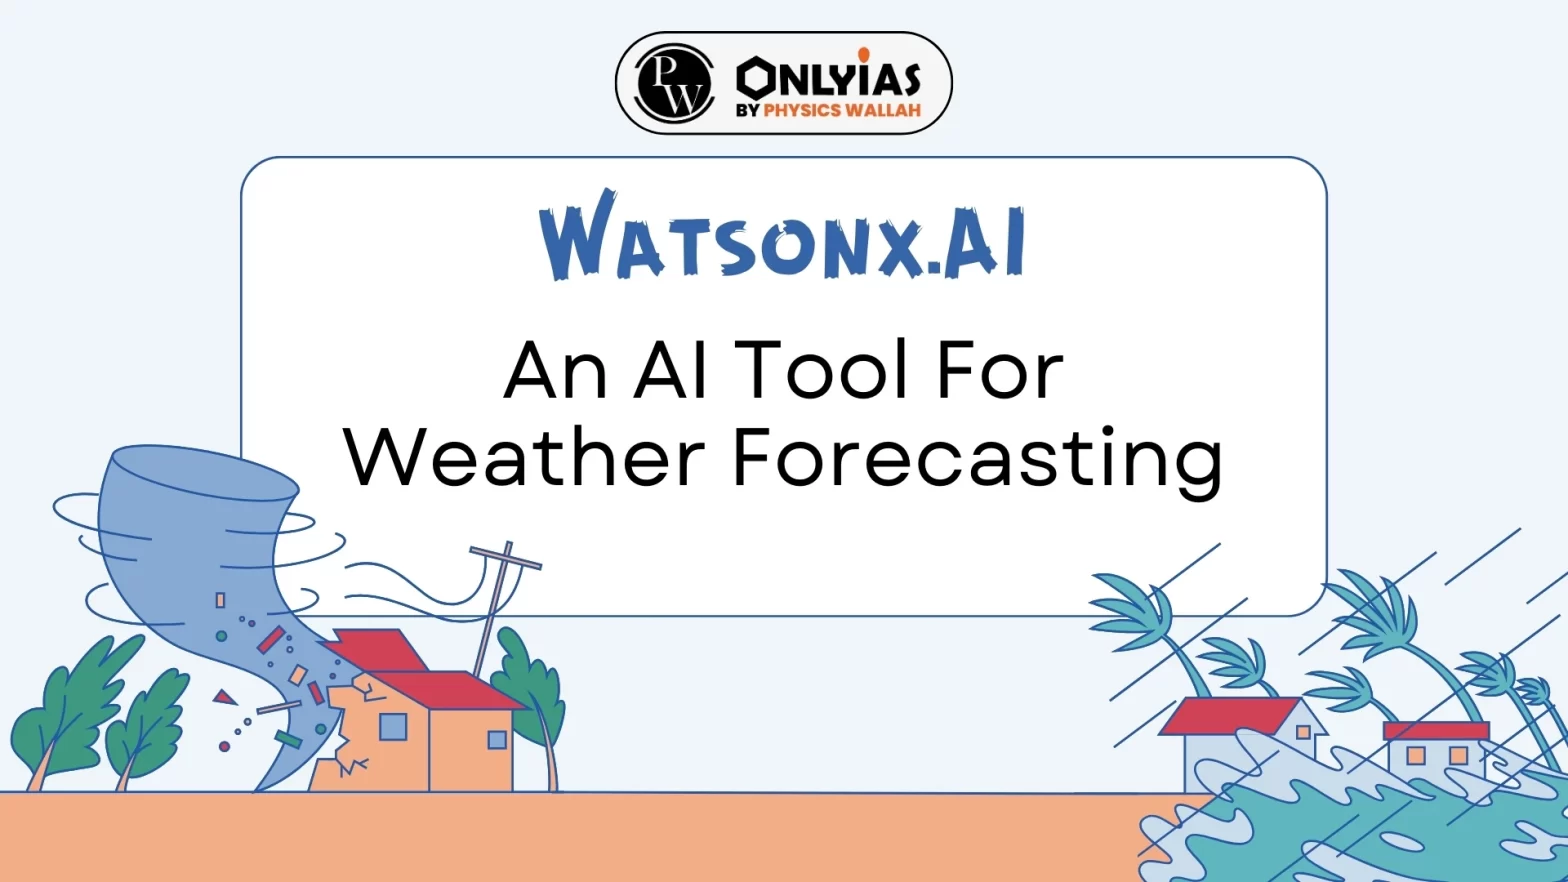 Watsonx.AI: An AI Tool For Weather Forecasting